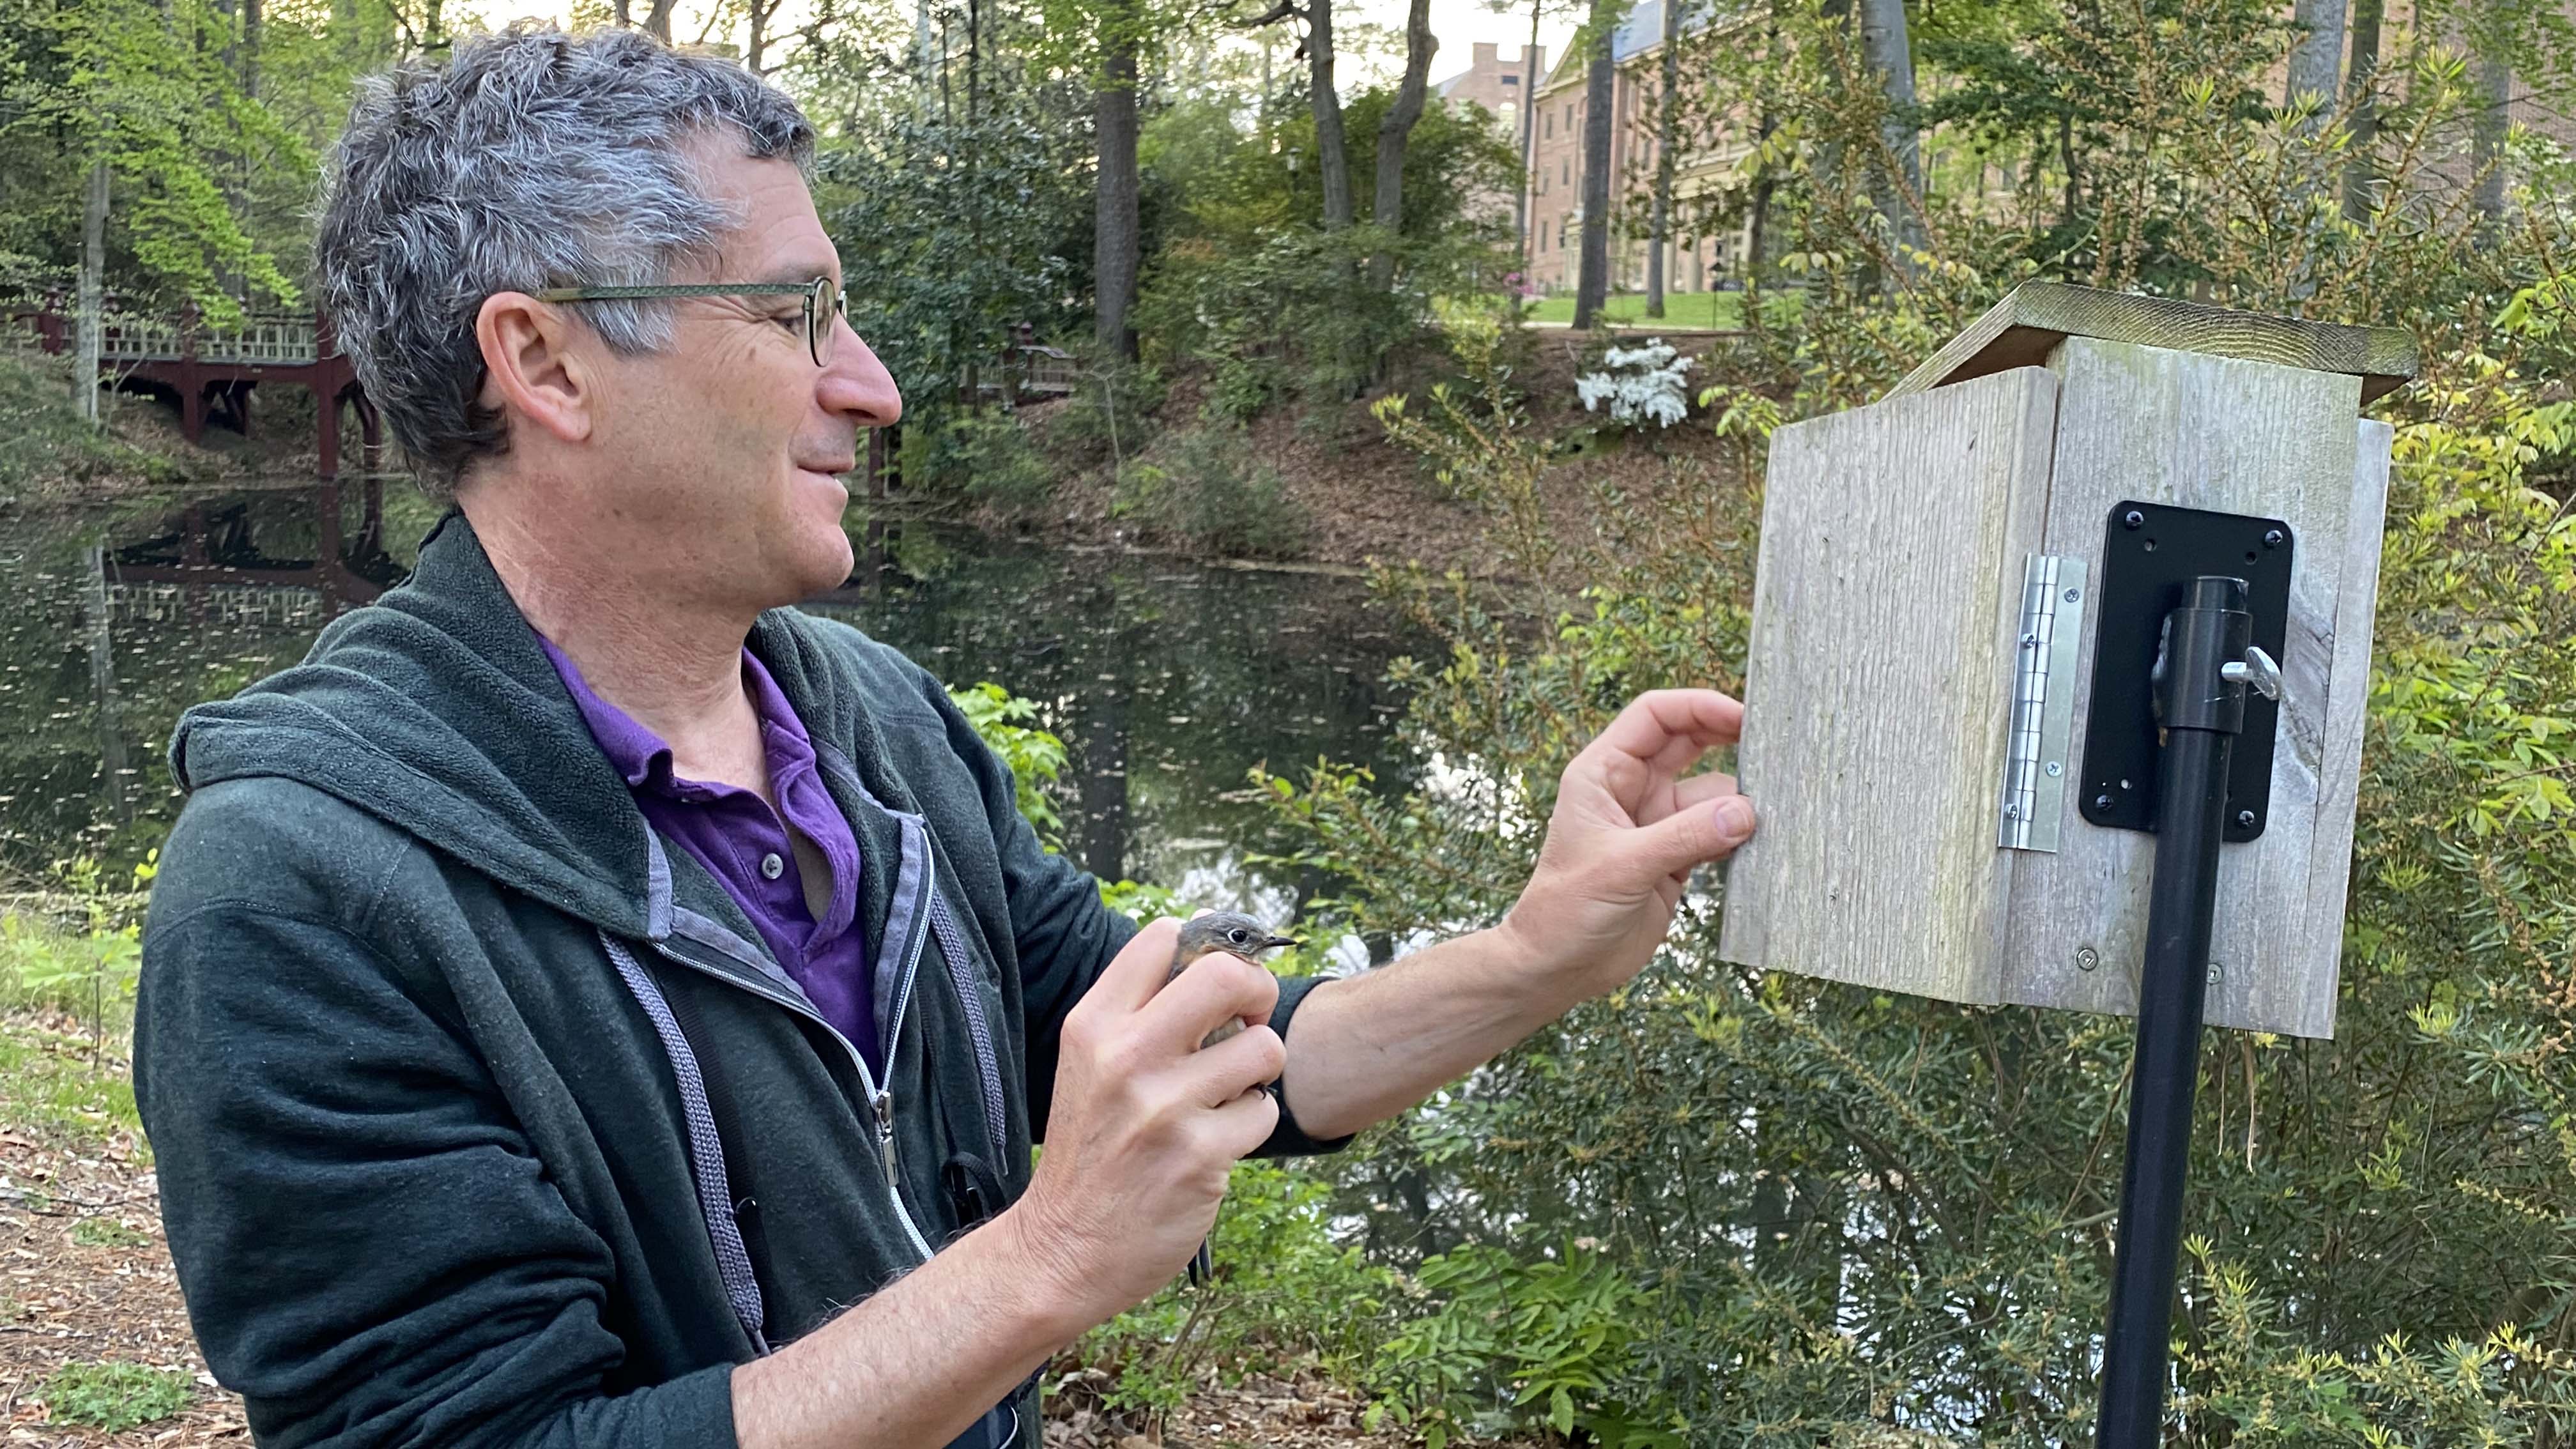 Professor Dan Cristol returns a bird to a birdhouse along the Crim Dell on William & Mary’s campus on Friday, April 22, 2022. Photo by Katherine Hafner.